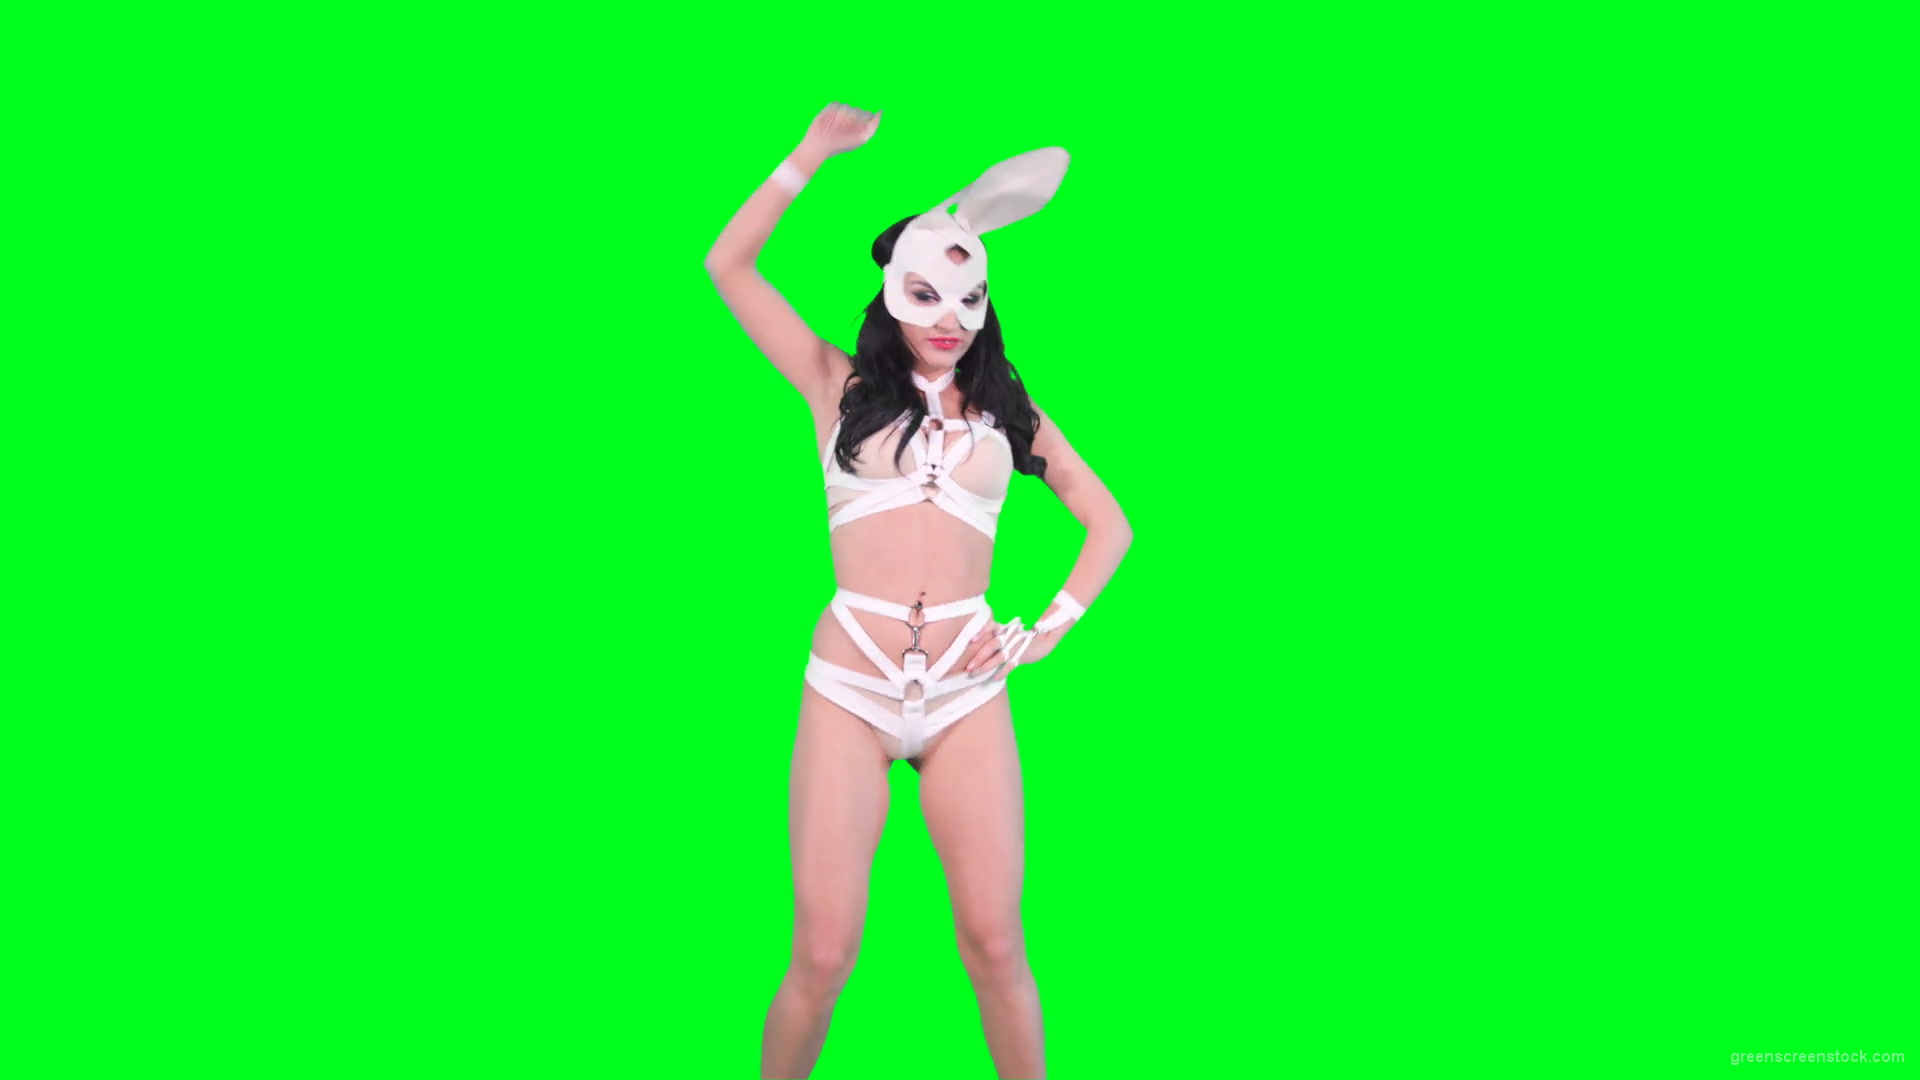 Girl-in-rabbit-bunny-mask-posing-and-show-gestures-on-green-screen-4K-Video-Footage-1920_005 Green Screen Stock